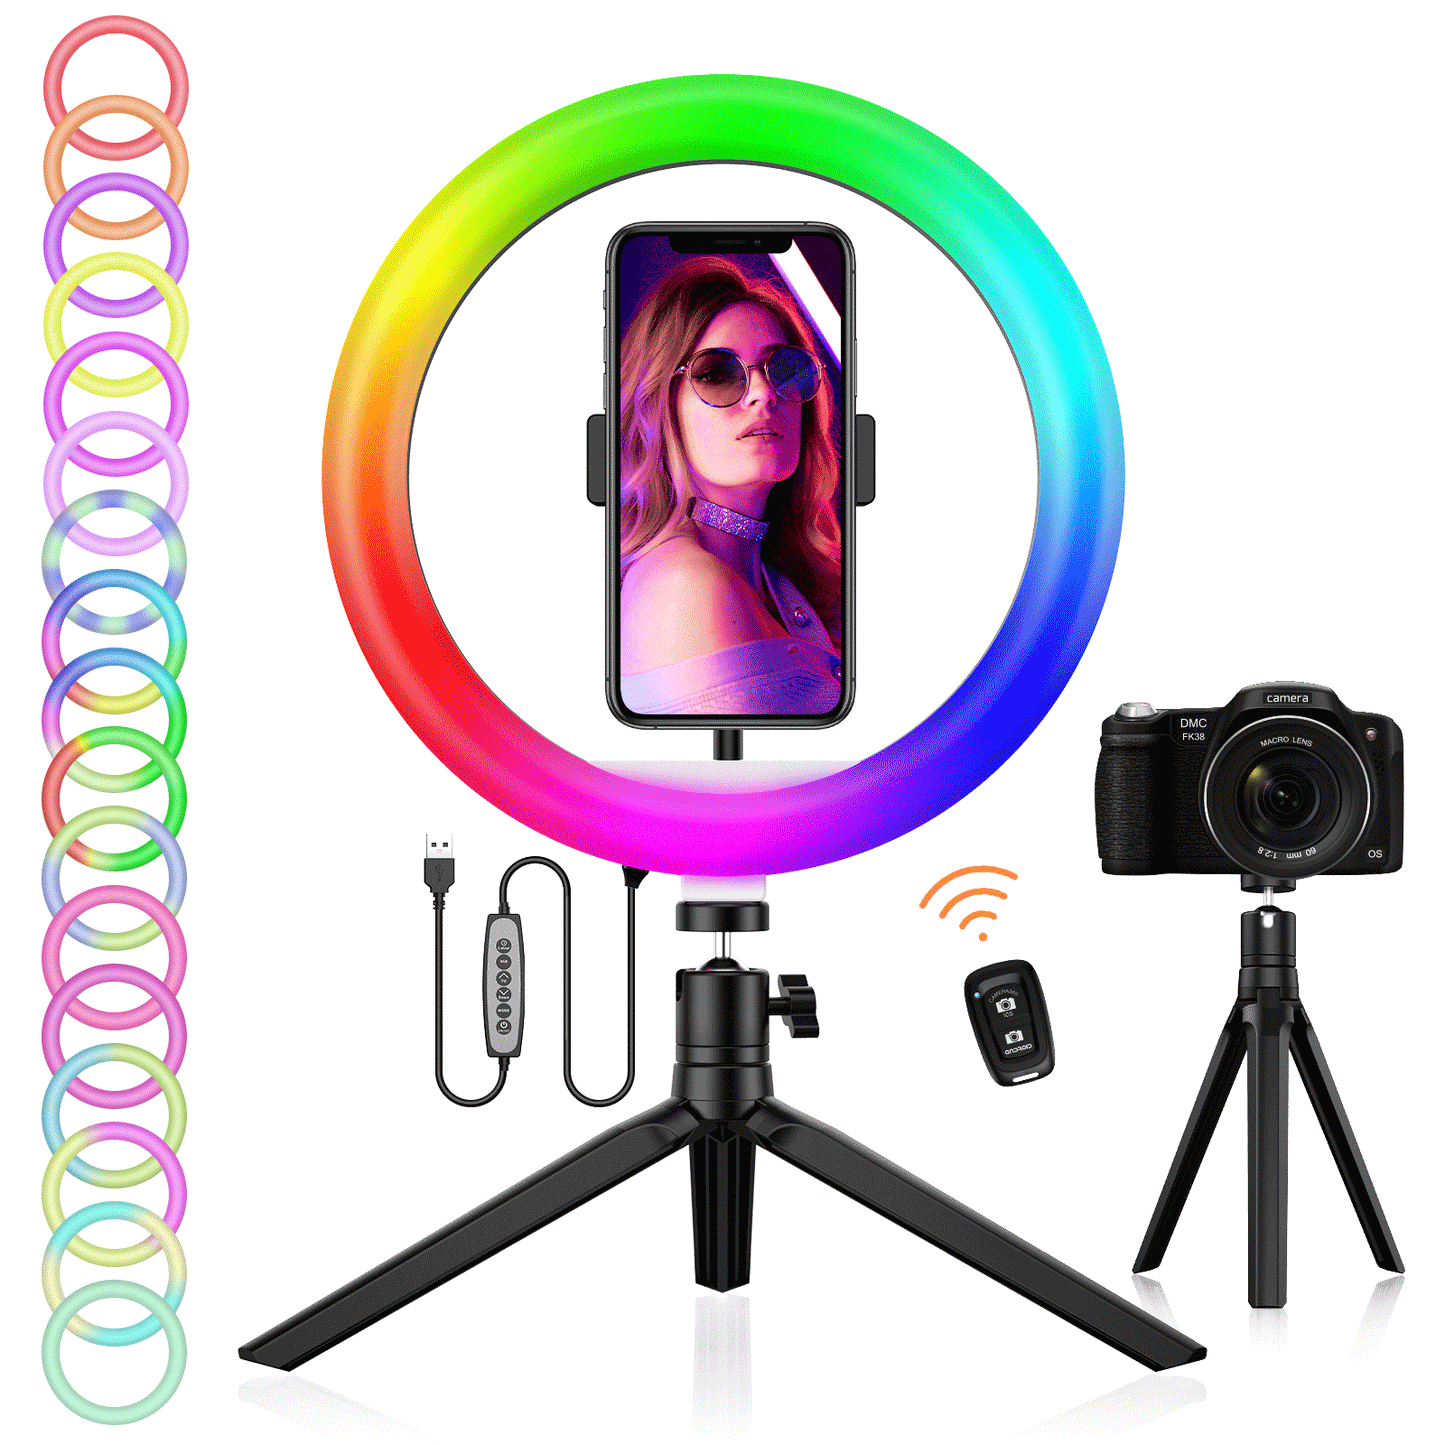 JEEMAK 10" LED Ring Light Kit Stand Dimmable USB Wireless Remote Control 360° Adjustable Angle For Makeup  Home Lighting Party Selfie Phone Camera Youtube